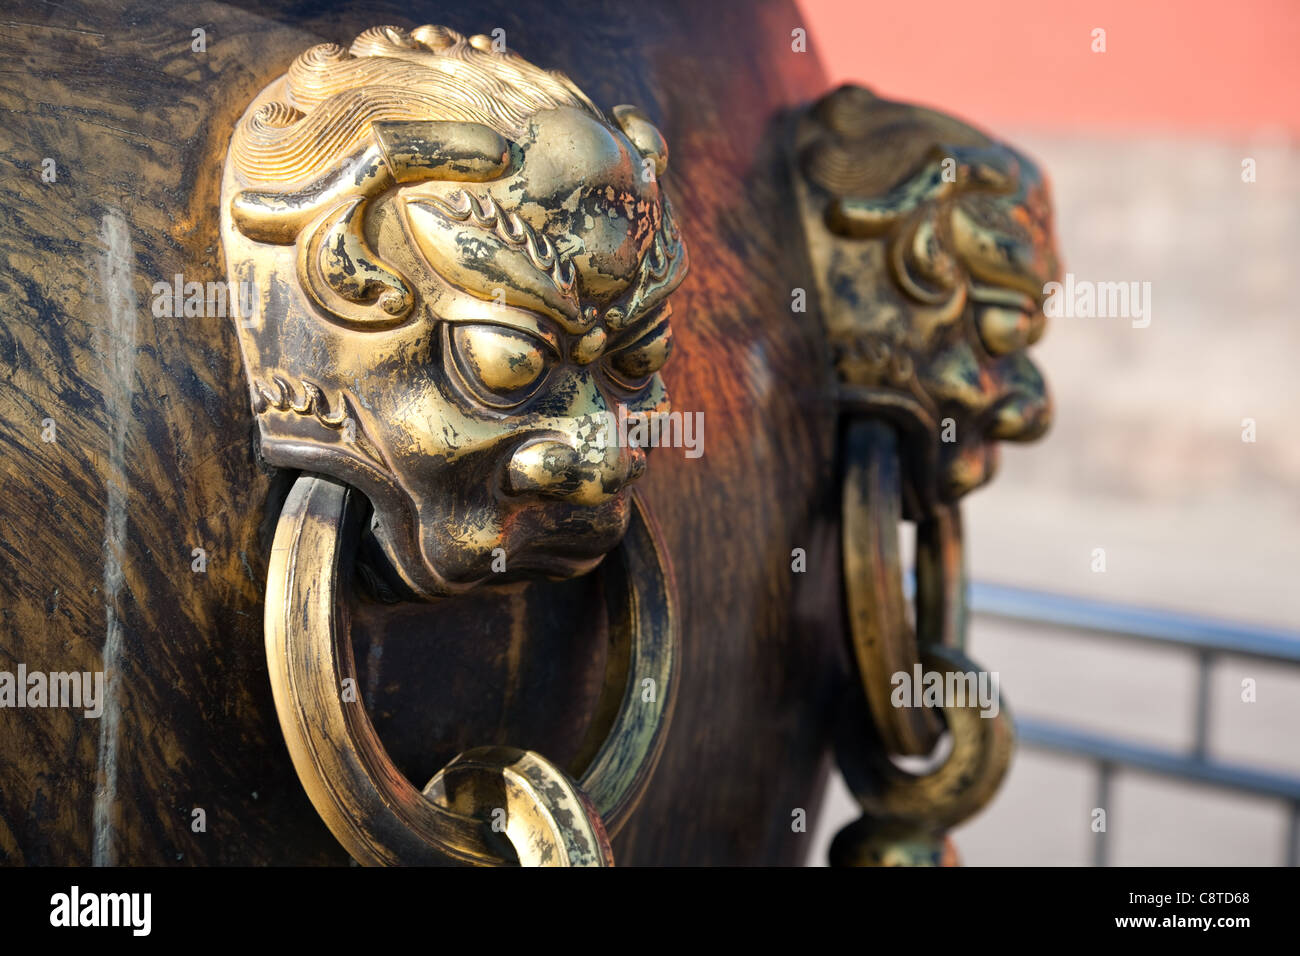 Lion head on a brass urn, means protecting the Forbidden City, Beijing, China Stock Photo